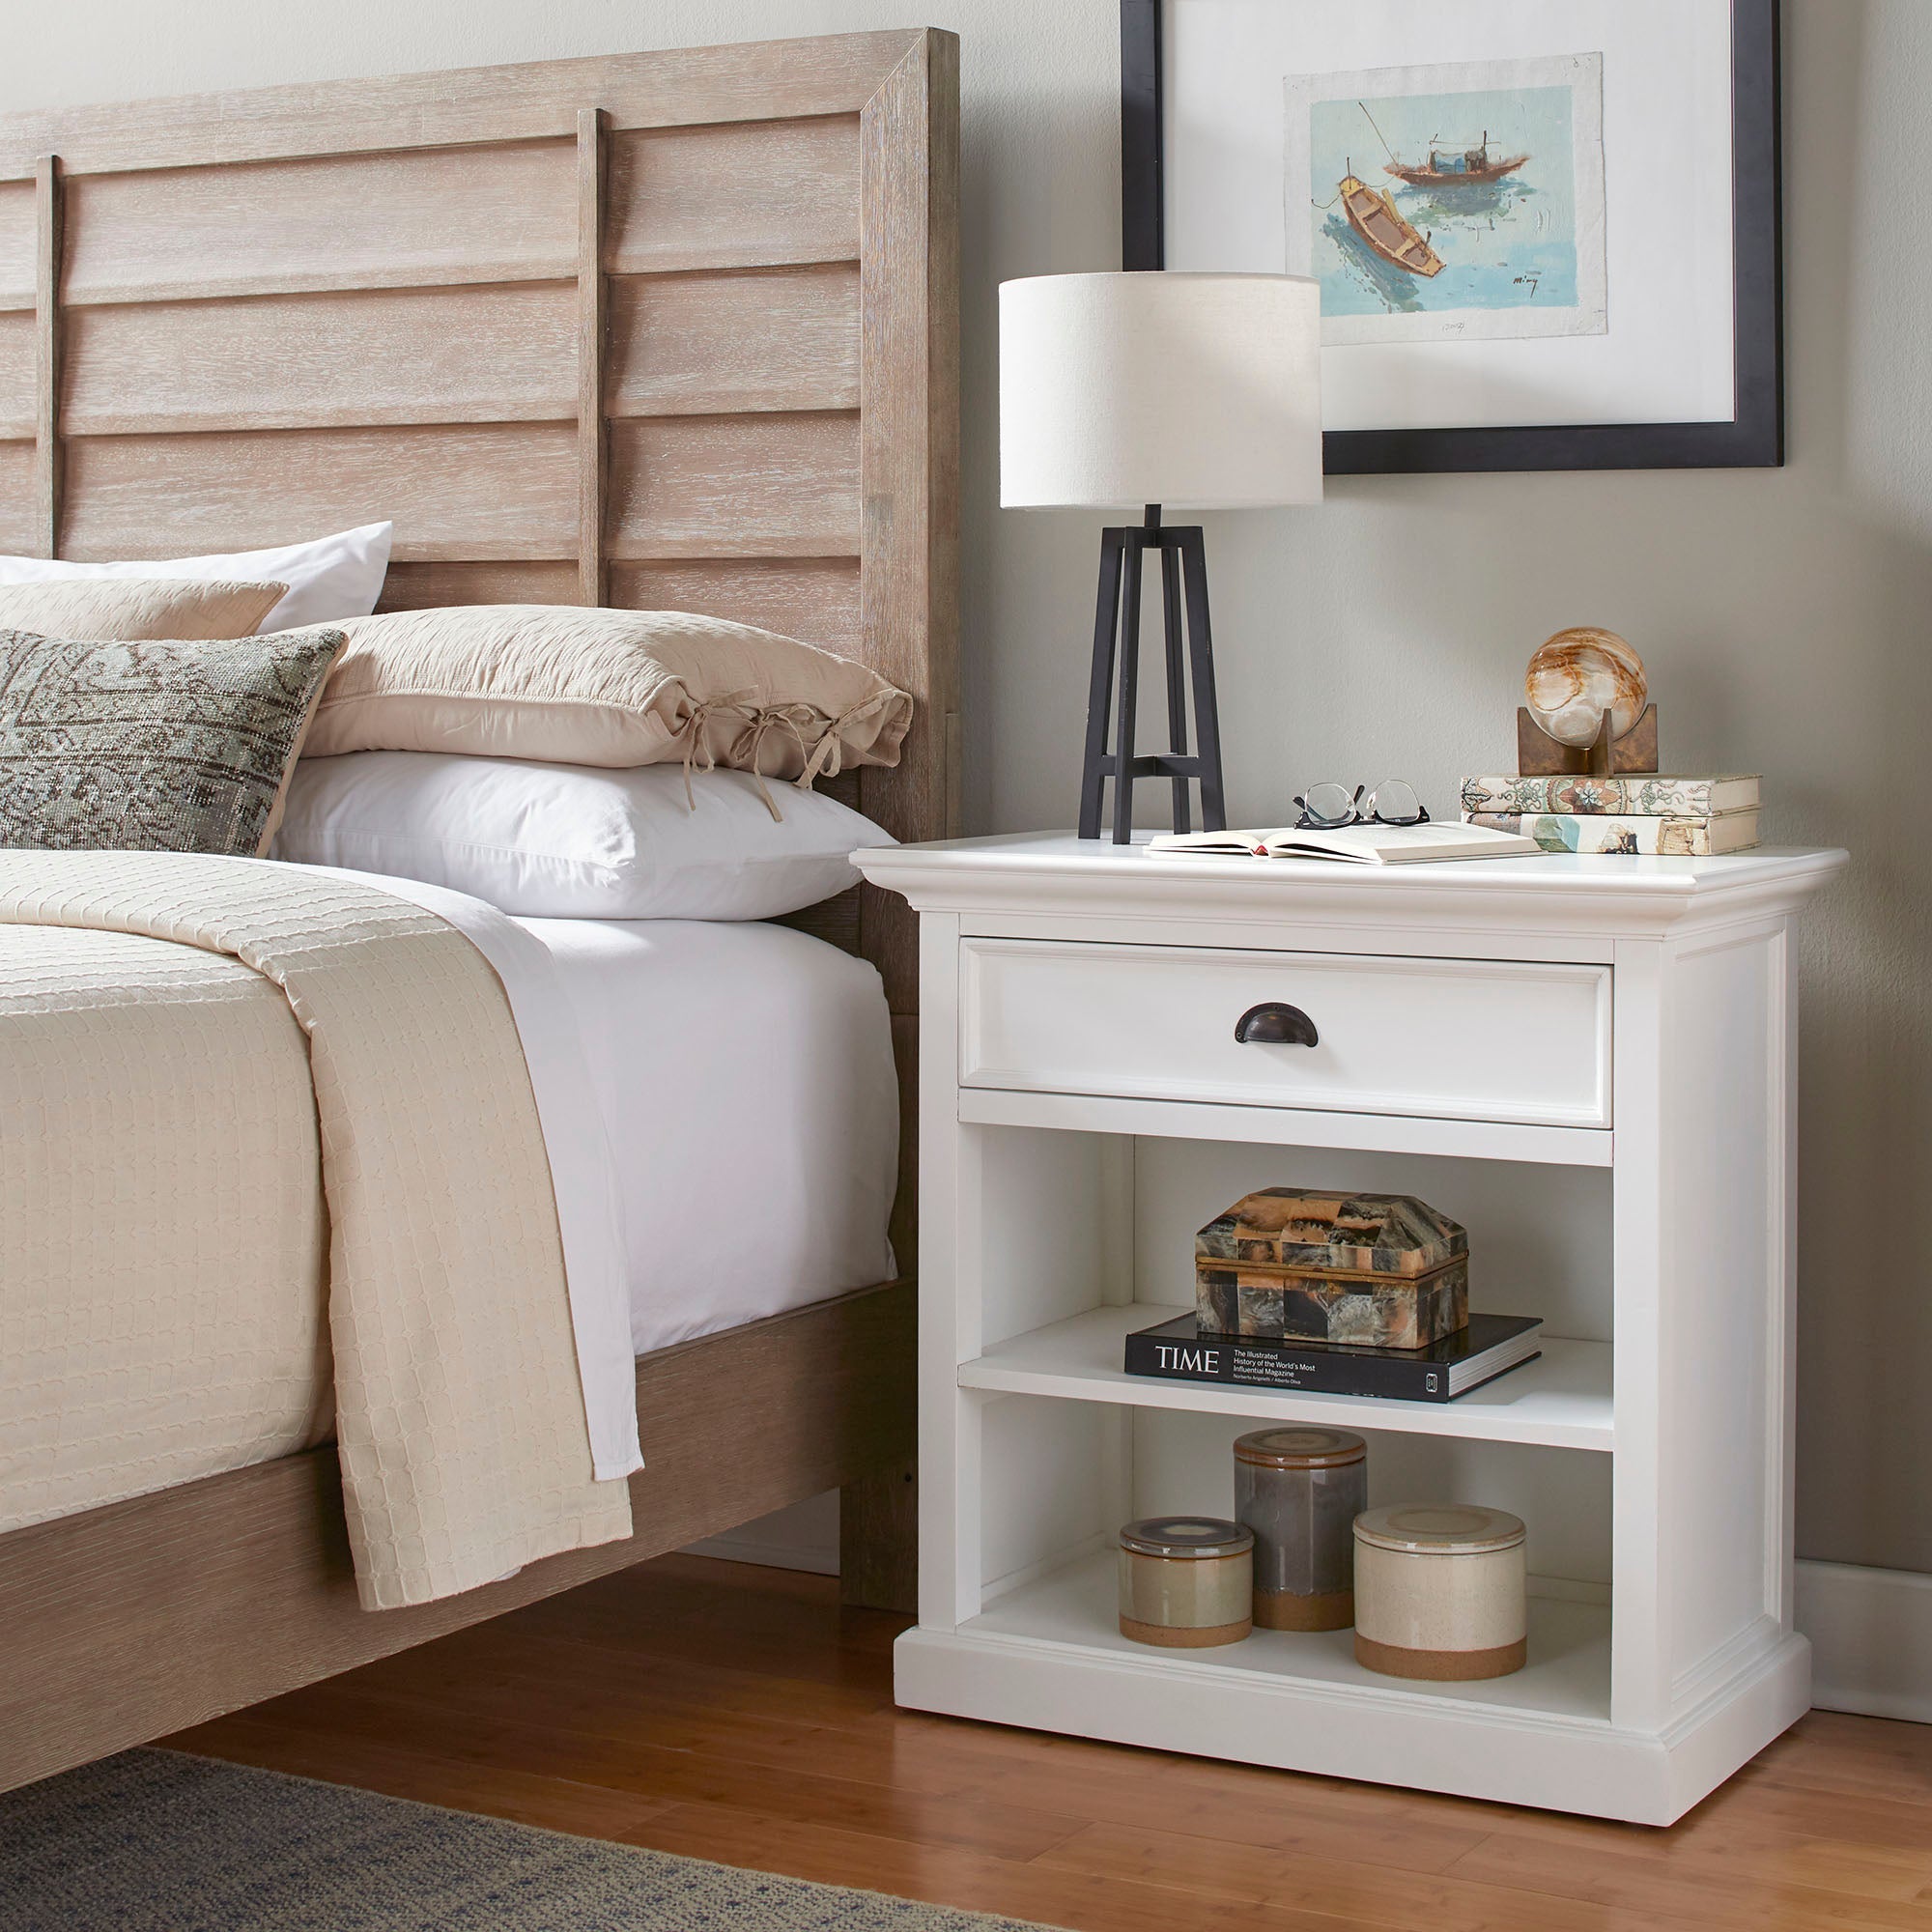 Halifax Grand Coastal White Bedside Table with Shelves